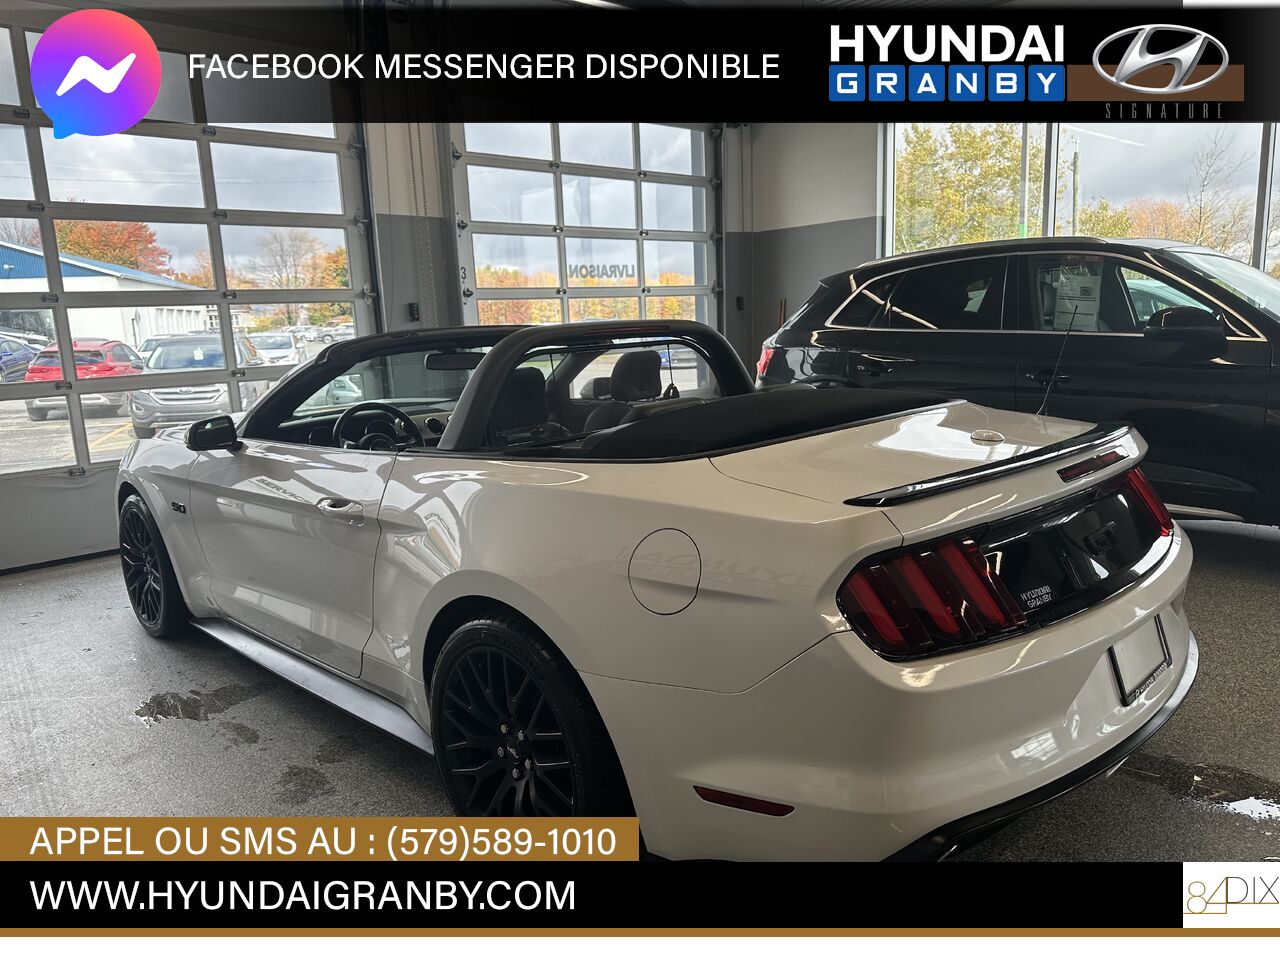 Ford Mustang 2017 Granby - photo #5